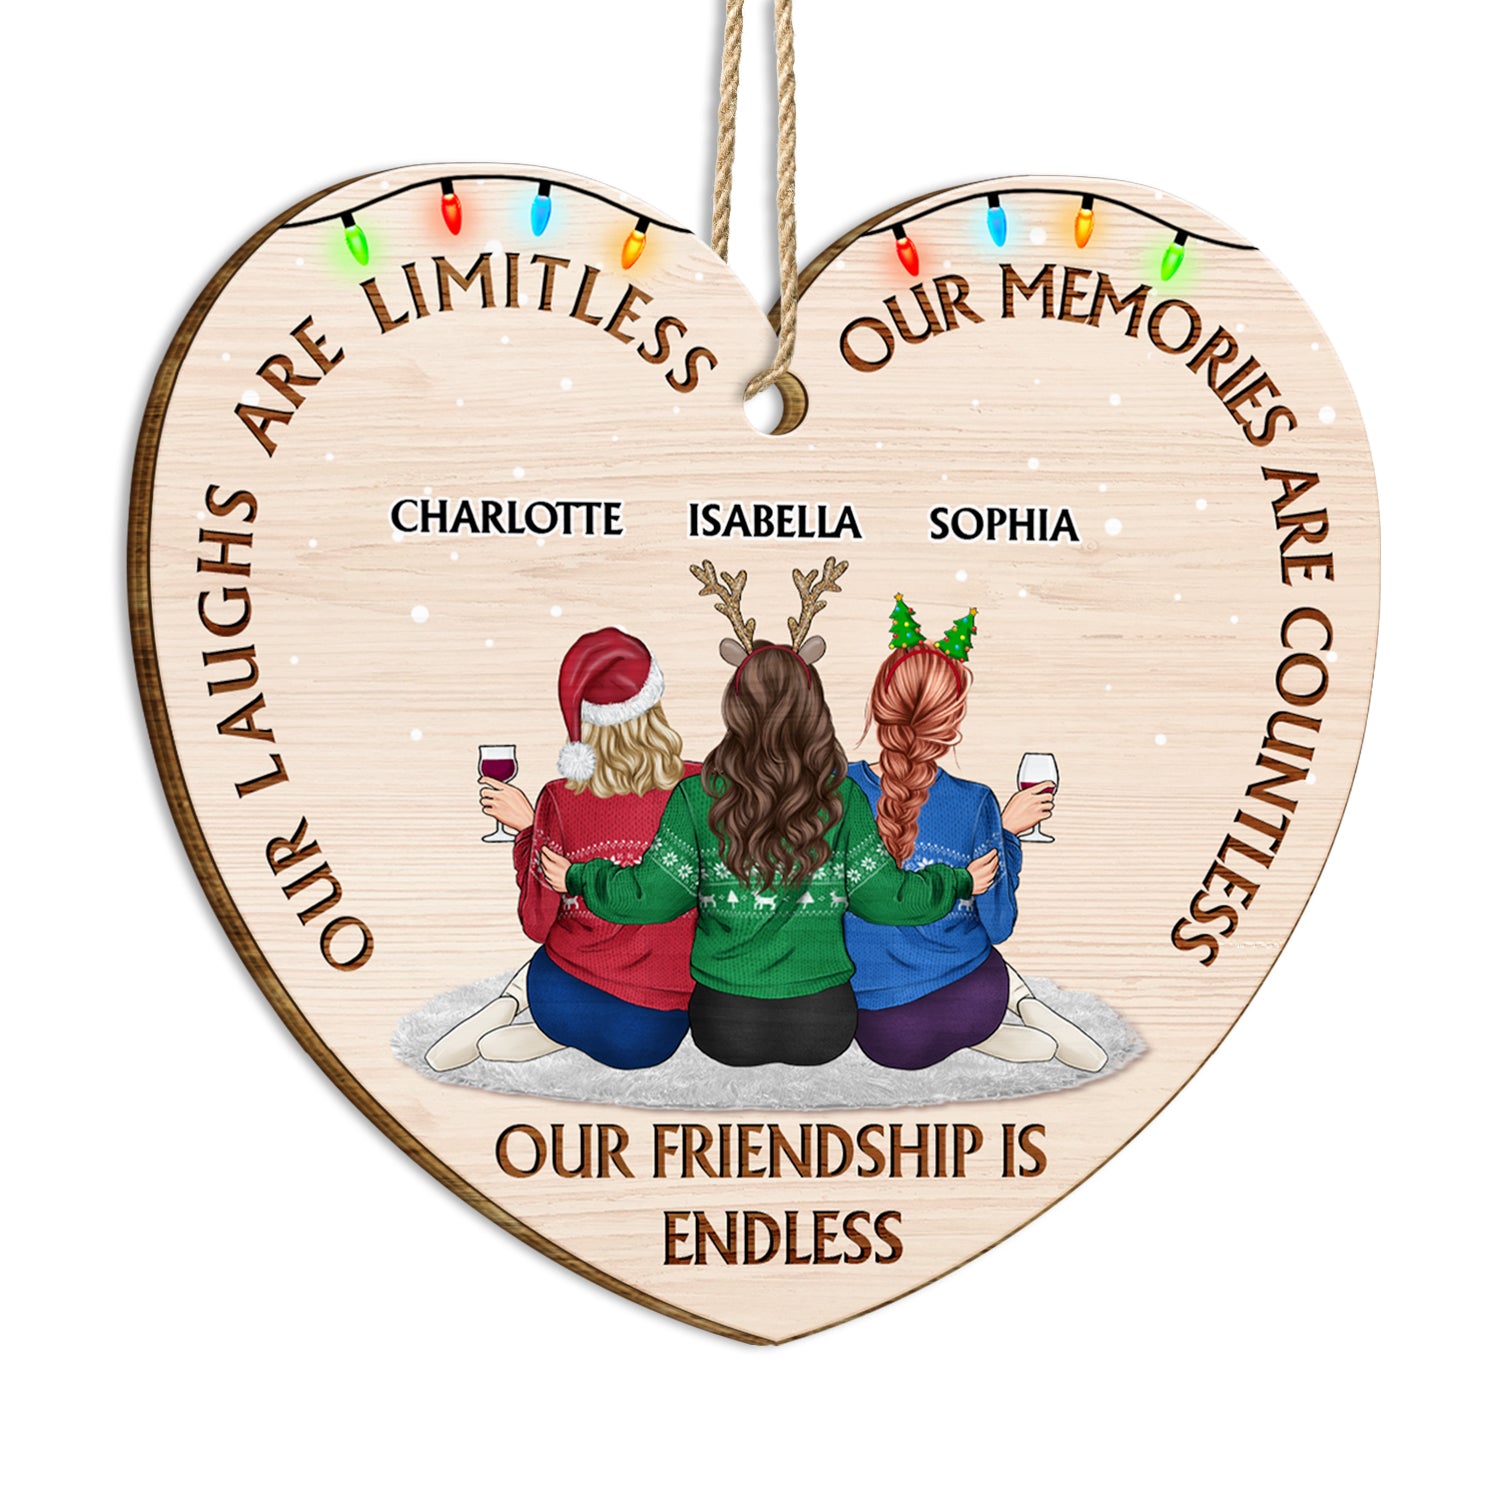 Our Memories Are Countless, Our Friendship Is Endless - Christmas Gifts For Best Friends, Besties - Personalized Custom Shaped Wooden Ornament